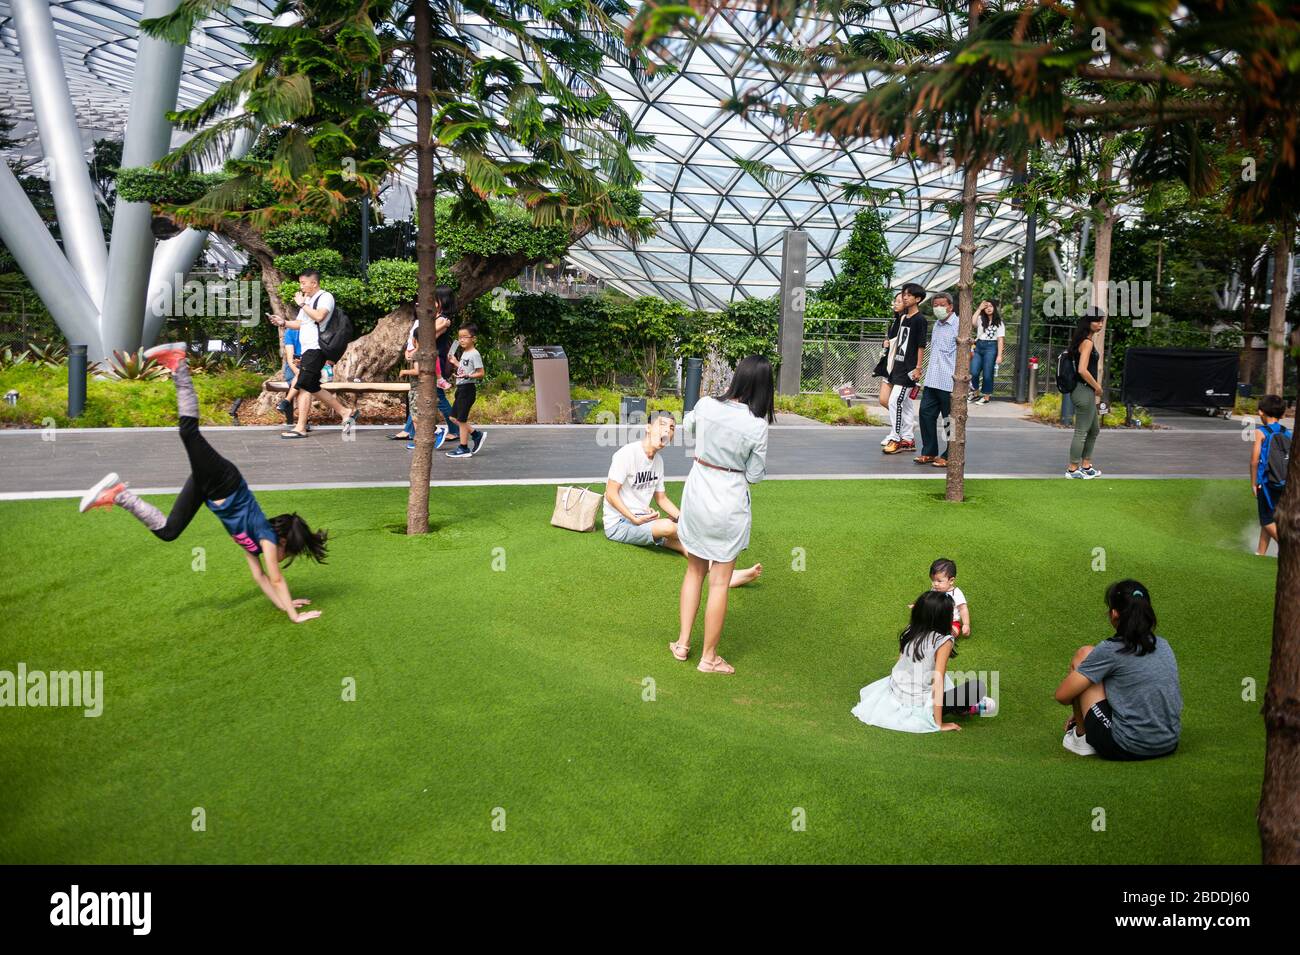 18.03.2020, Singapore, , Singapore - Children play on the artificial turf of the Foggy Bowls, a playground surrounded by pine trees in Canopy Park, in Stock Photo